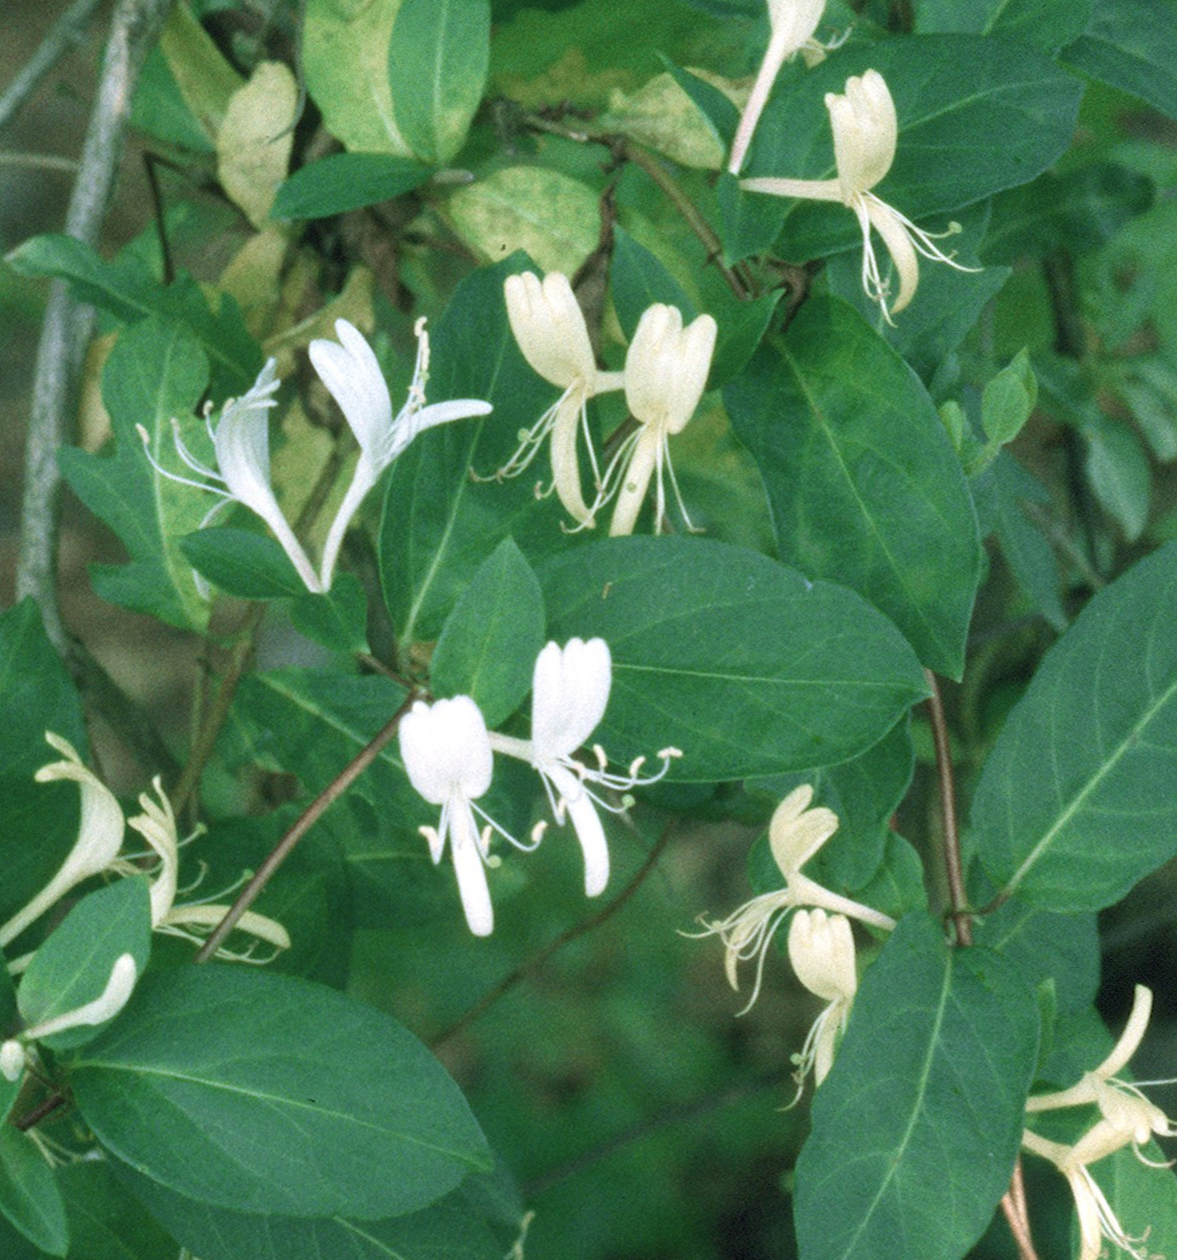 Most Georgians have fond childhood memories of honeysuckle vines, but the species of the fragrant vine that is most common is actually an invasive.